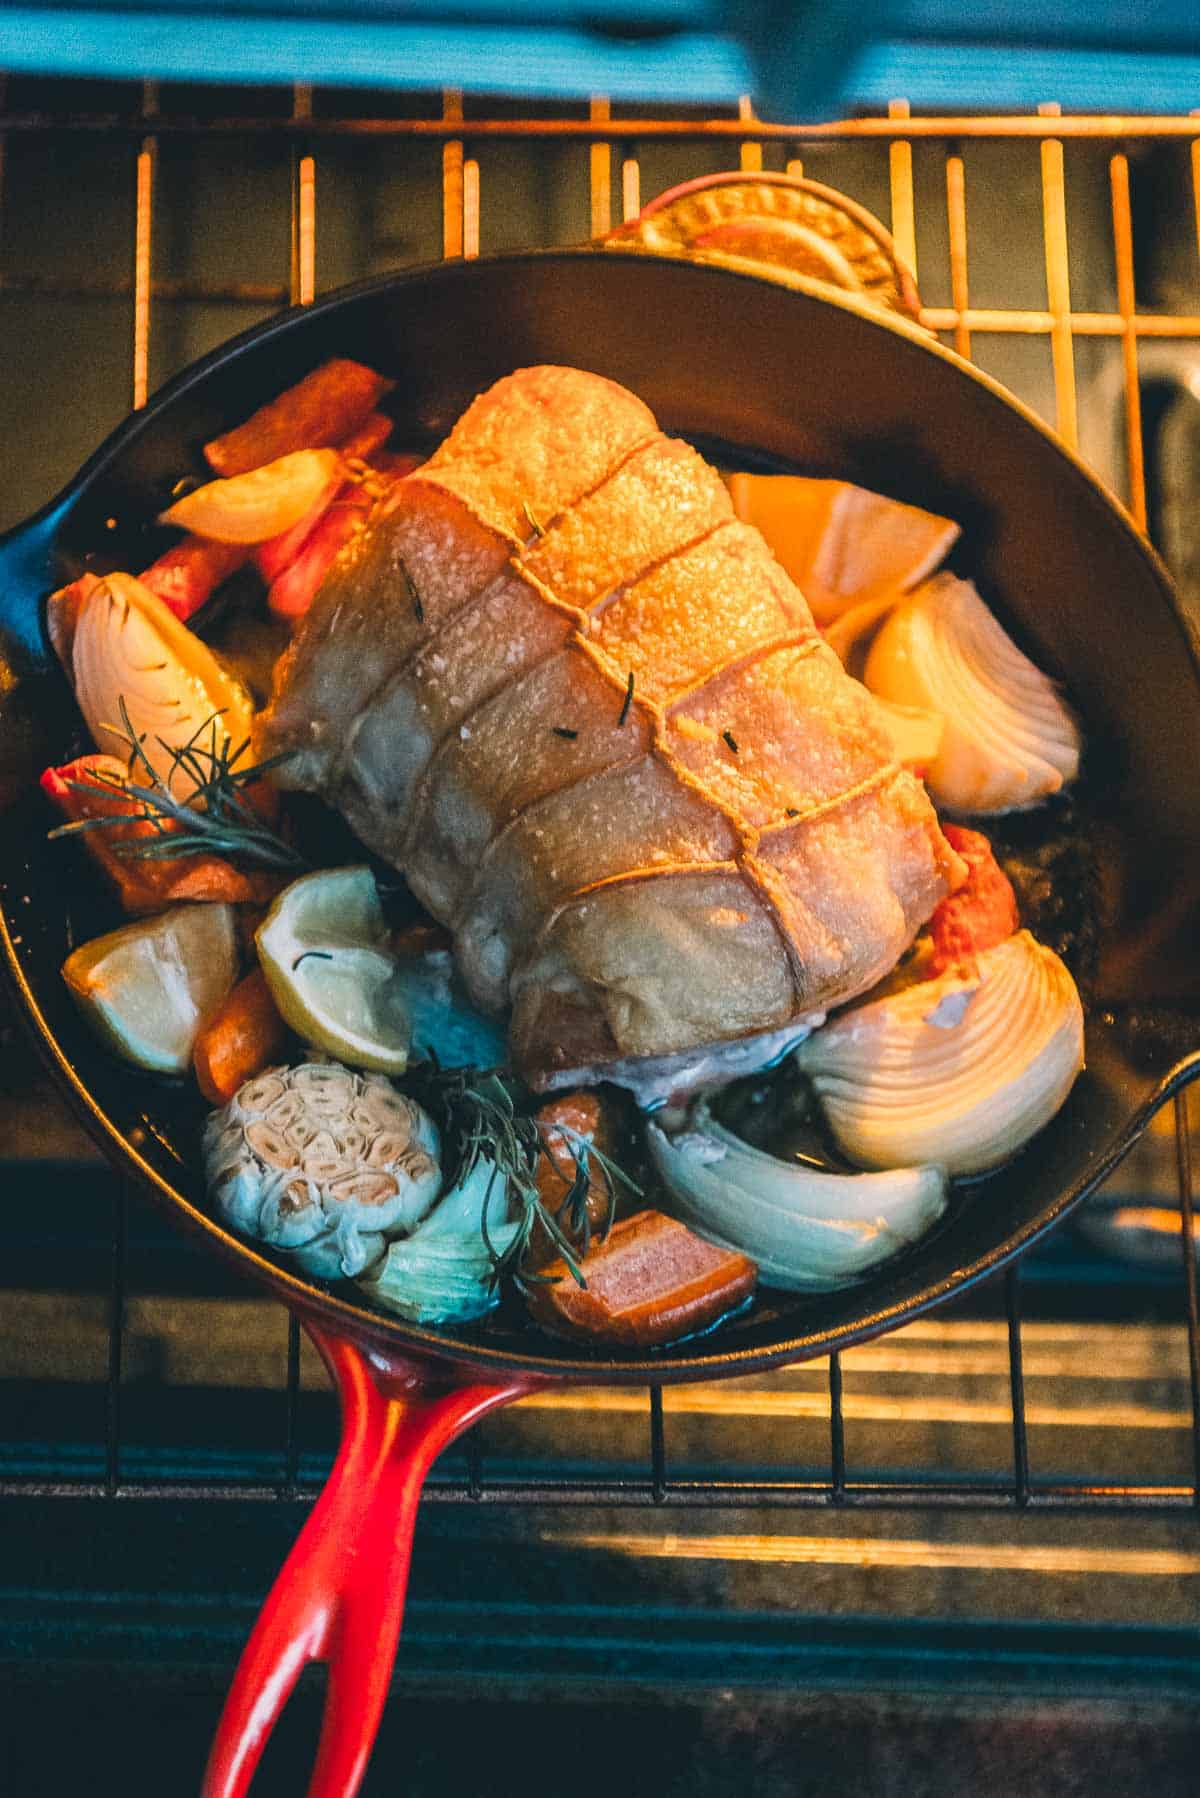 A skillet with a pork roast and vegetables going into the oven.